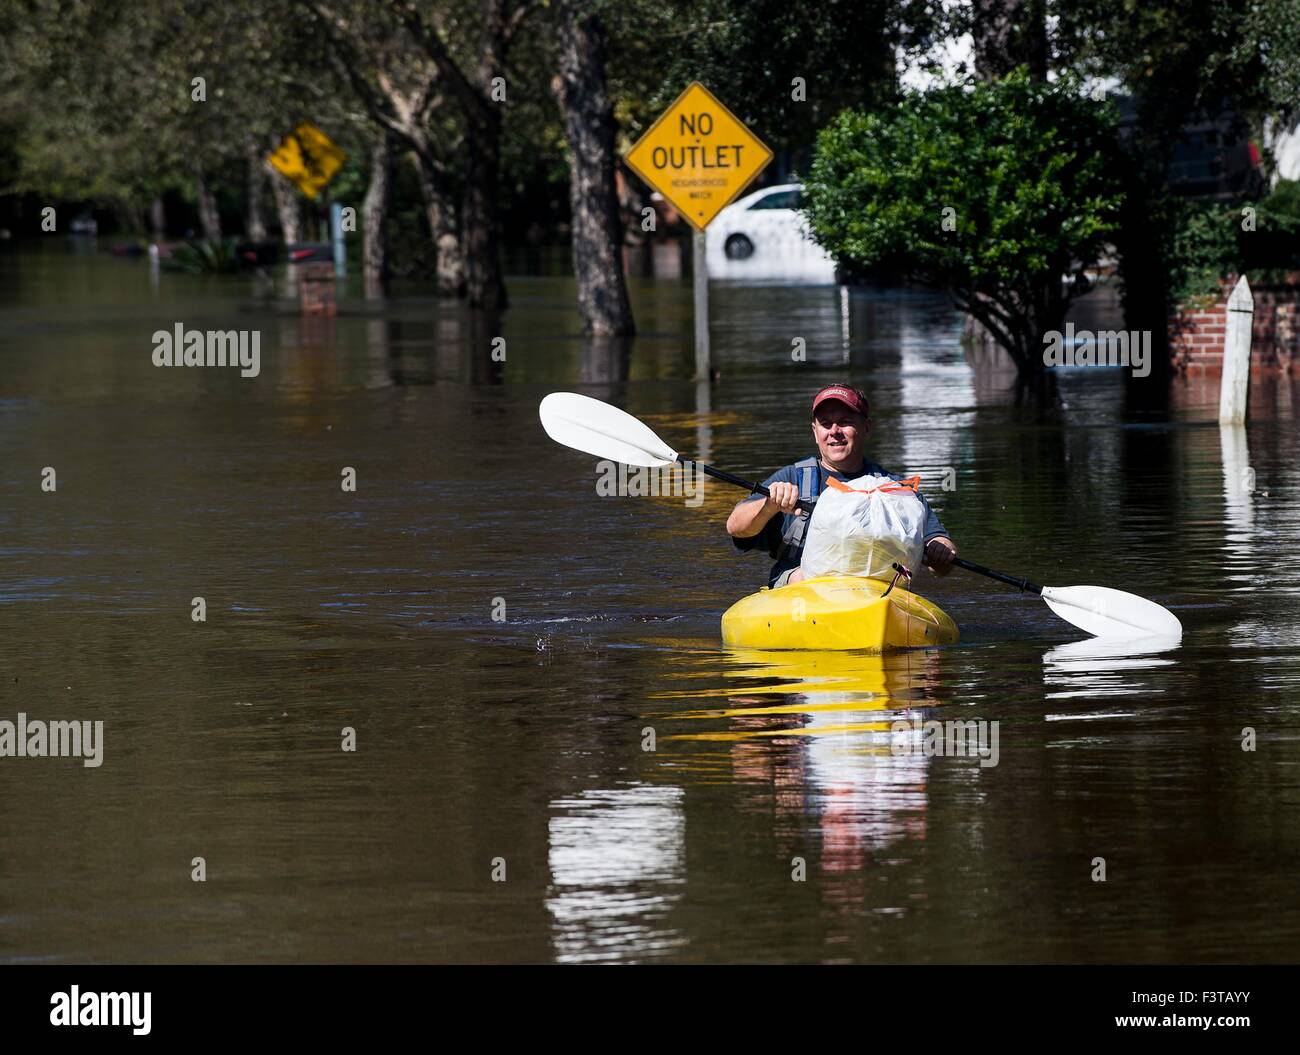 A resident of the Ashborough subdivision paddles a kayak through floodwaters October 8, 2015 in Summerville, South Carolina. Large parts of South Carolina suffered from record setting rains that flooded large portions of the state. Stock Photo